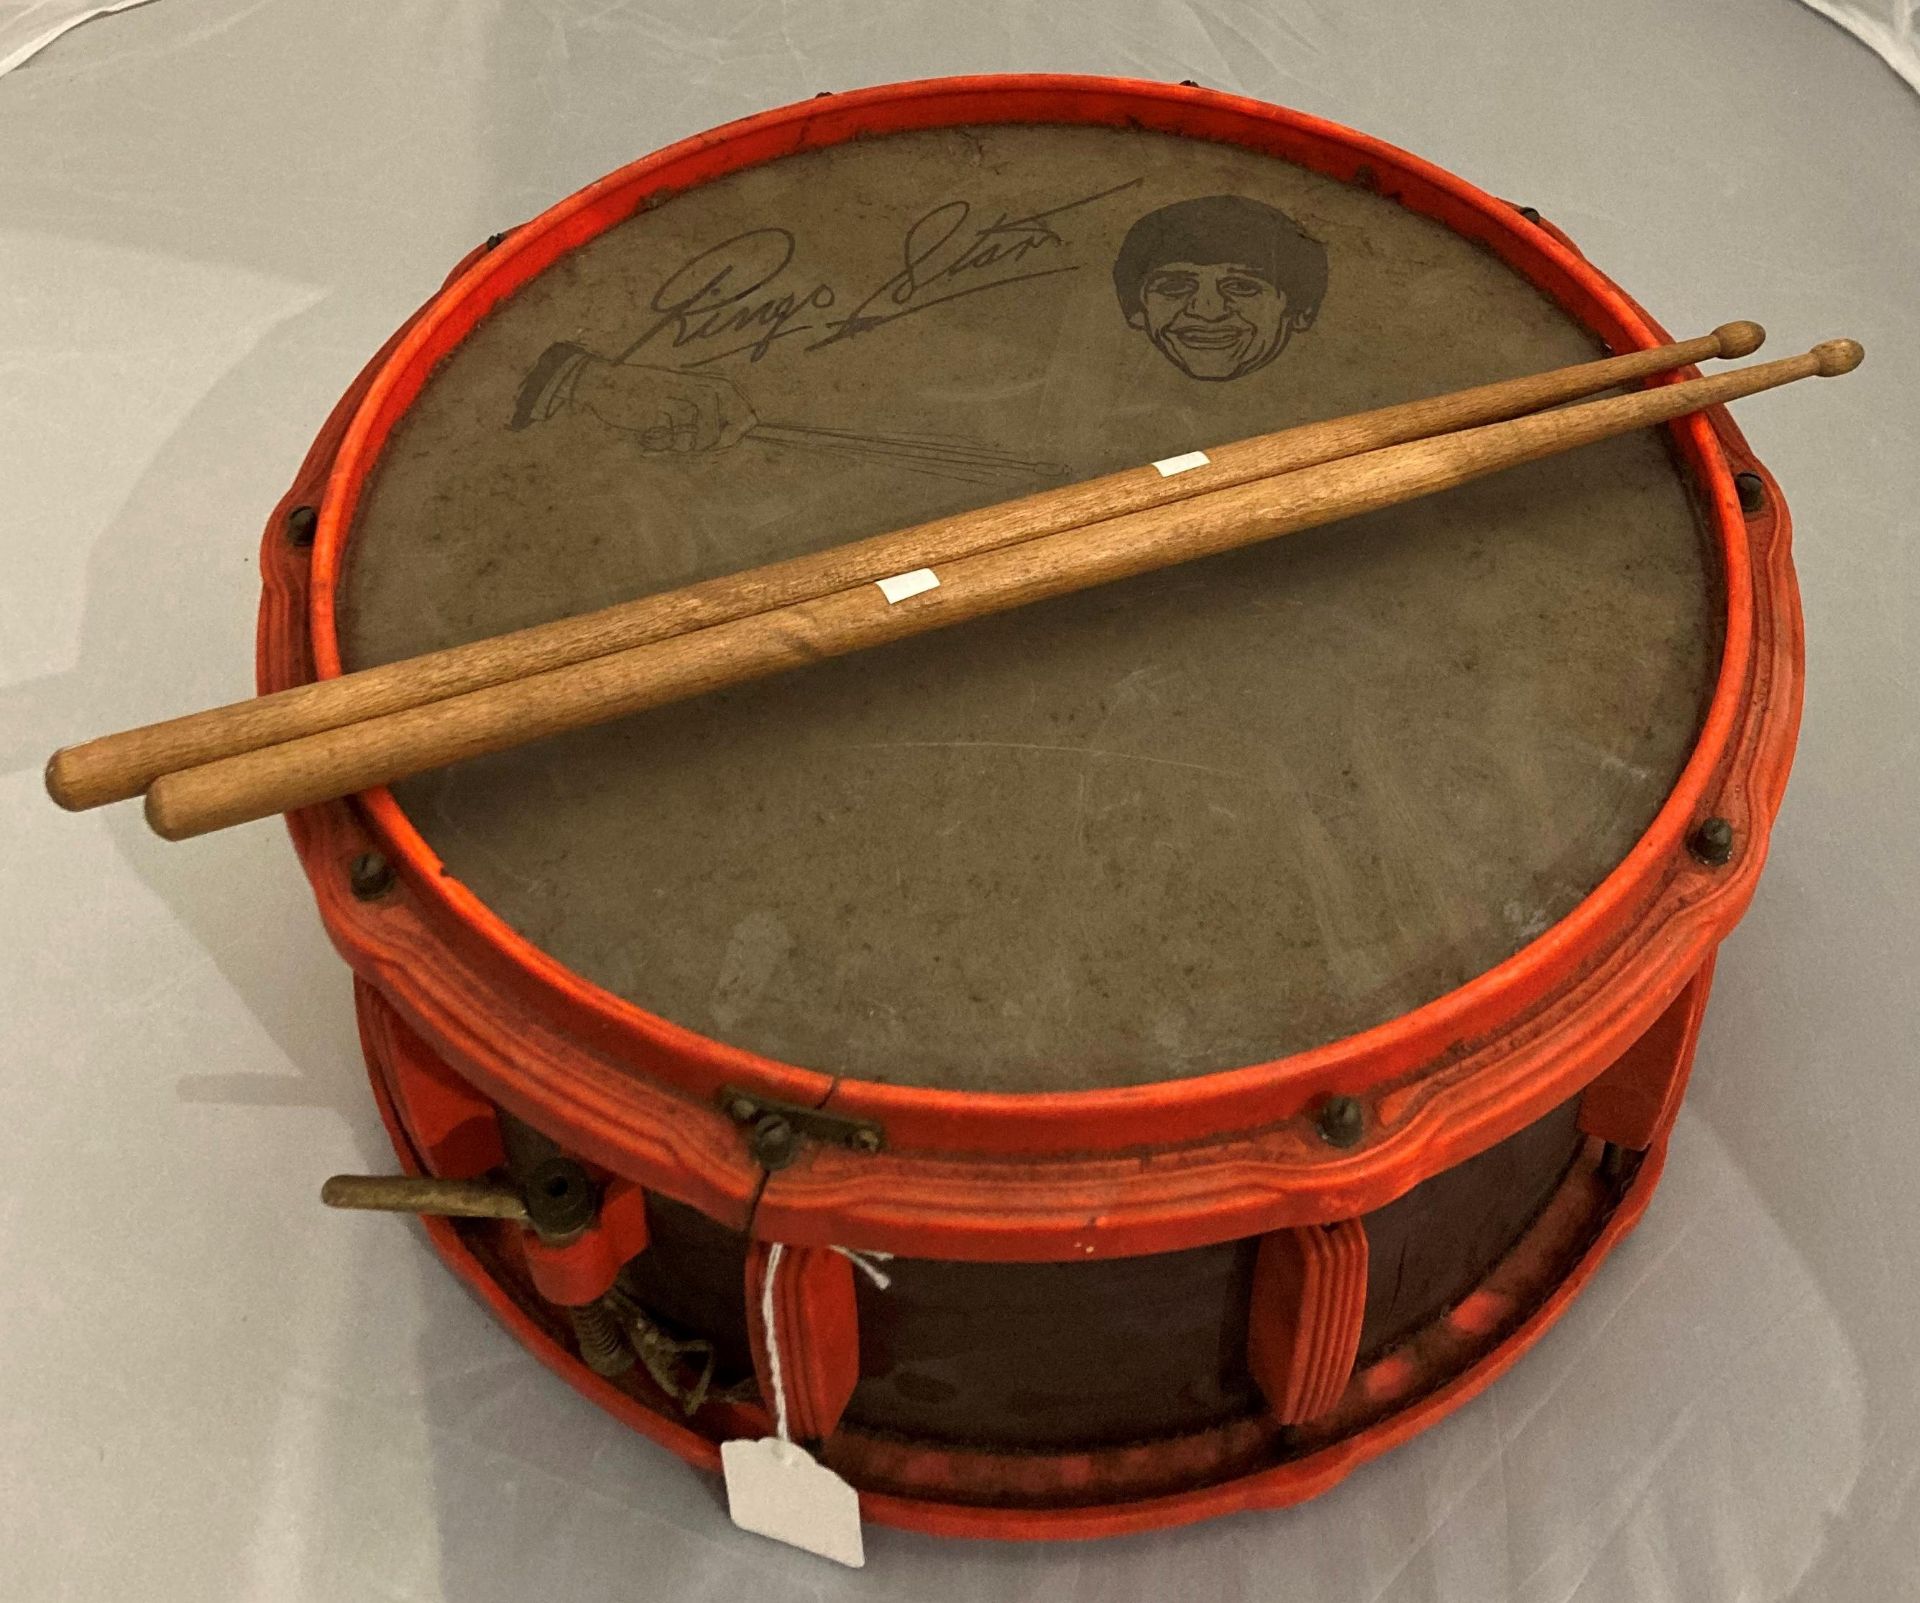 Ringo Star New Beat plastic snare drum with two wooden drum sticks by Selco (Saleroom location: S3)